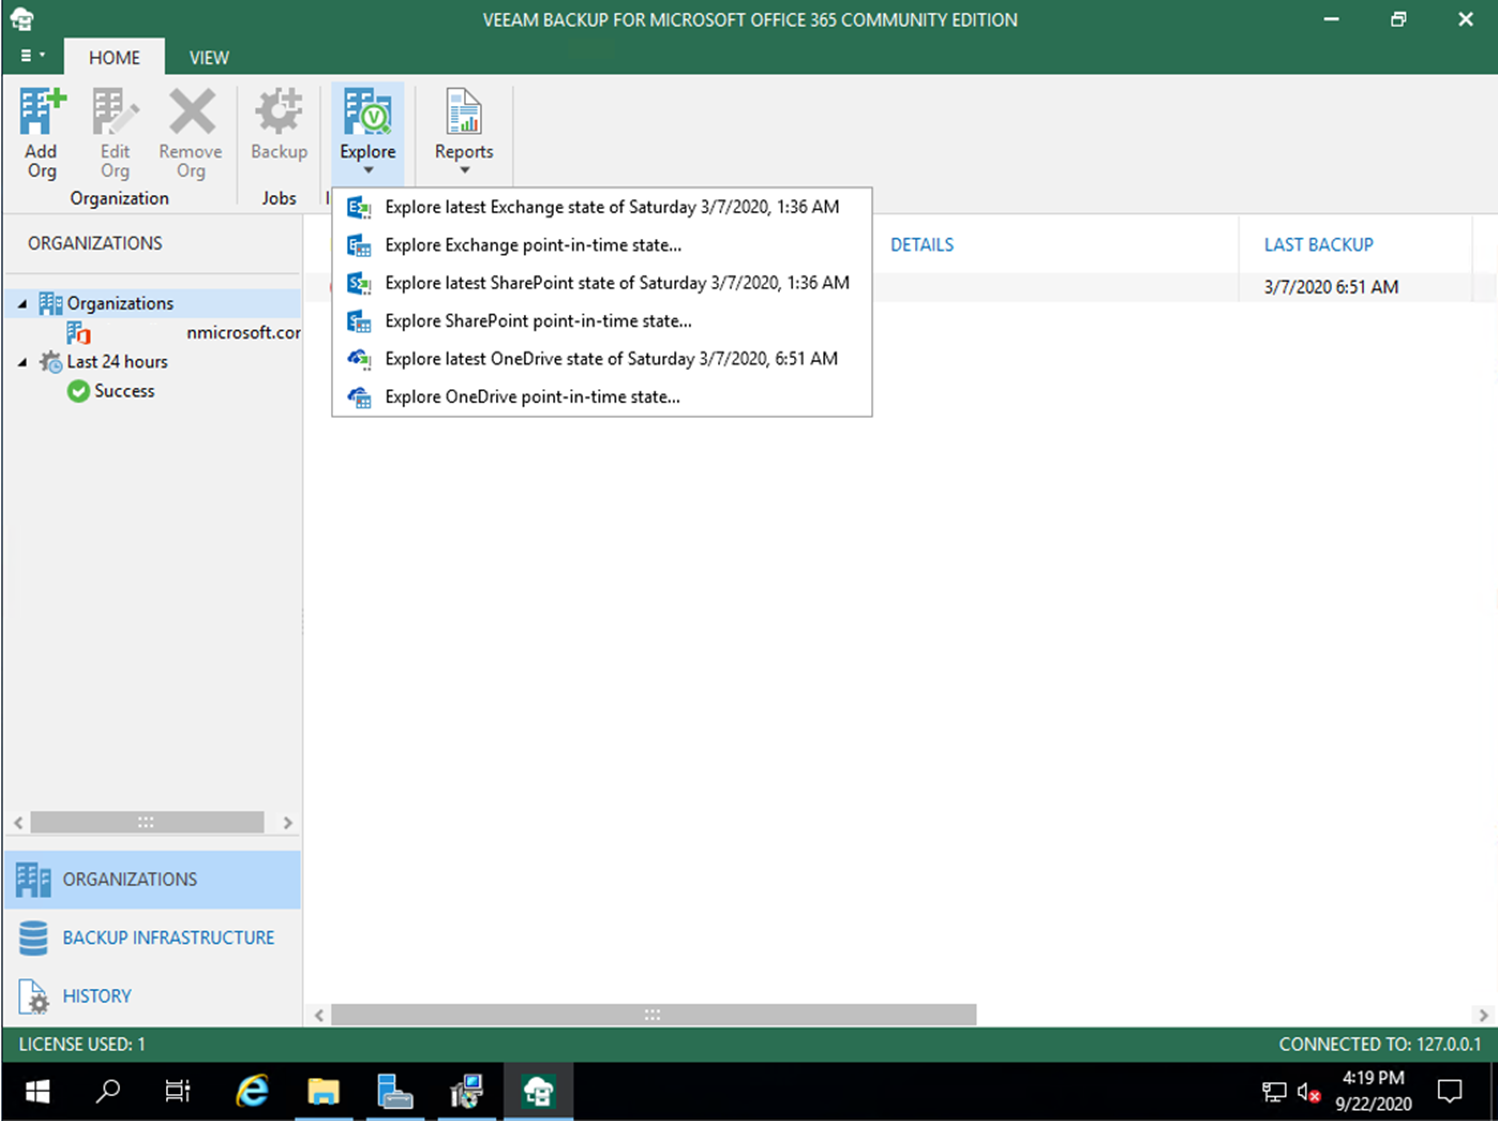 100320 2346 HowtoUpgrad4 - How to Upgrade Veeam Backup for Microsoft Office 365 to V4c Day 0 Update